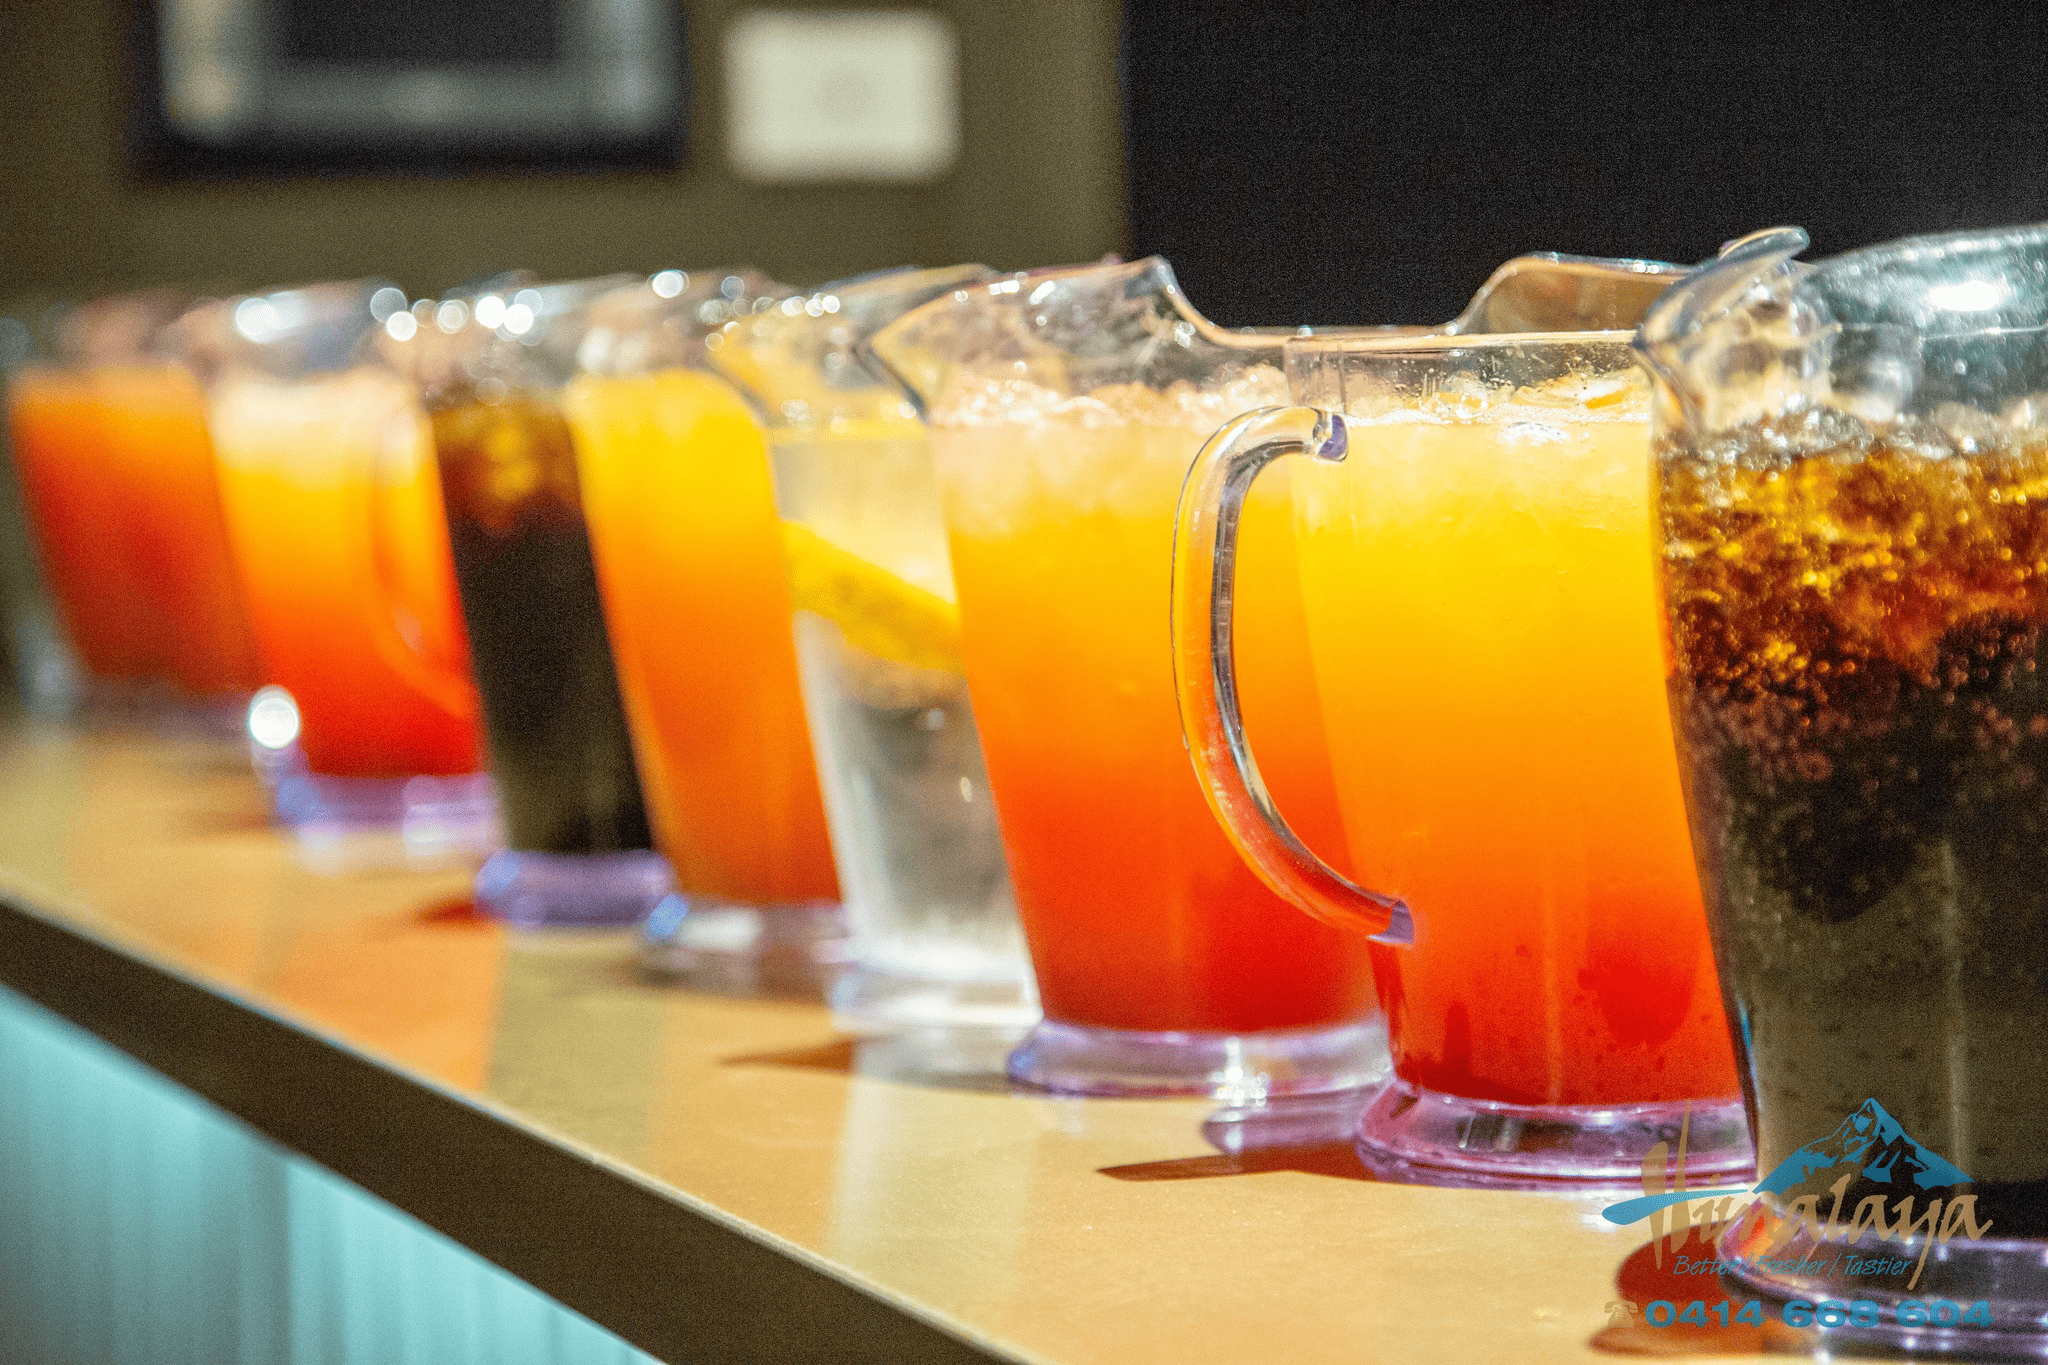 Assortment of beverages served at a catering event.